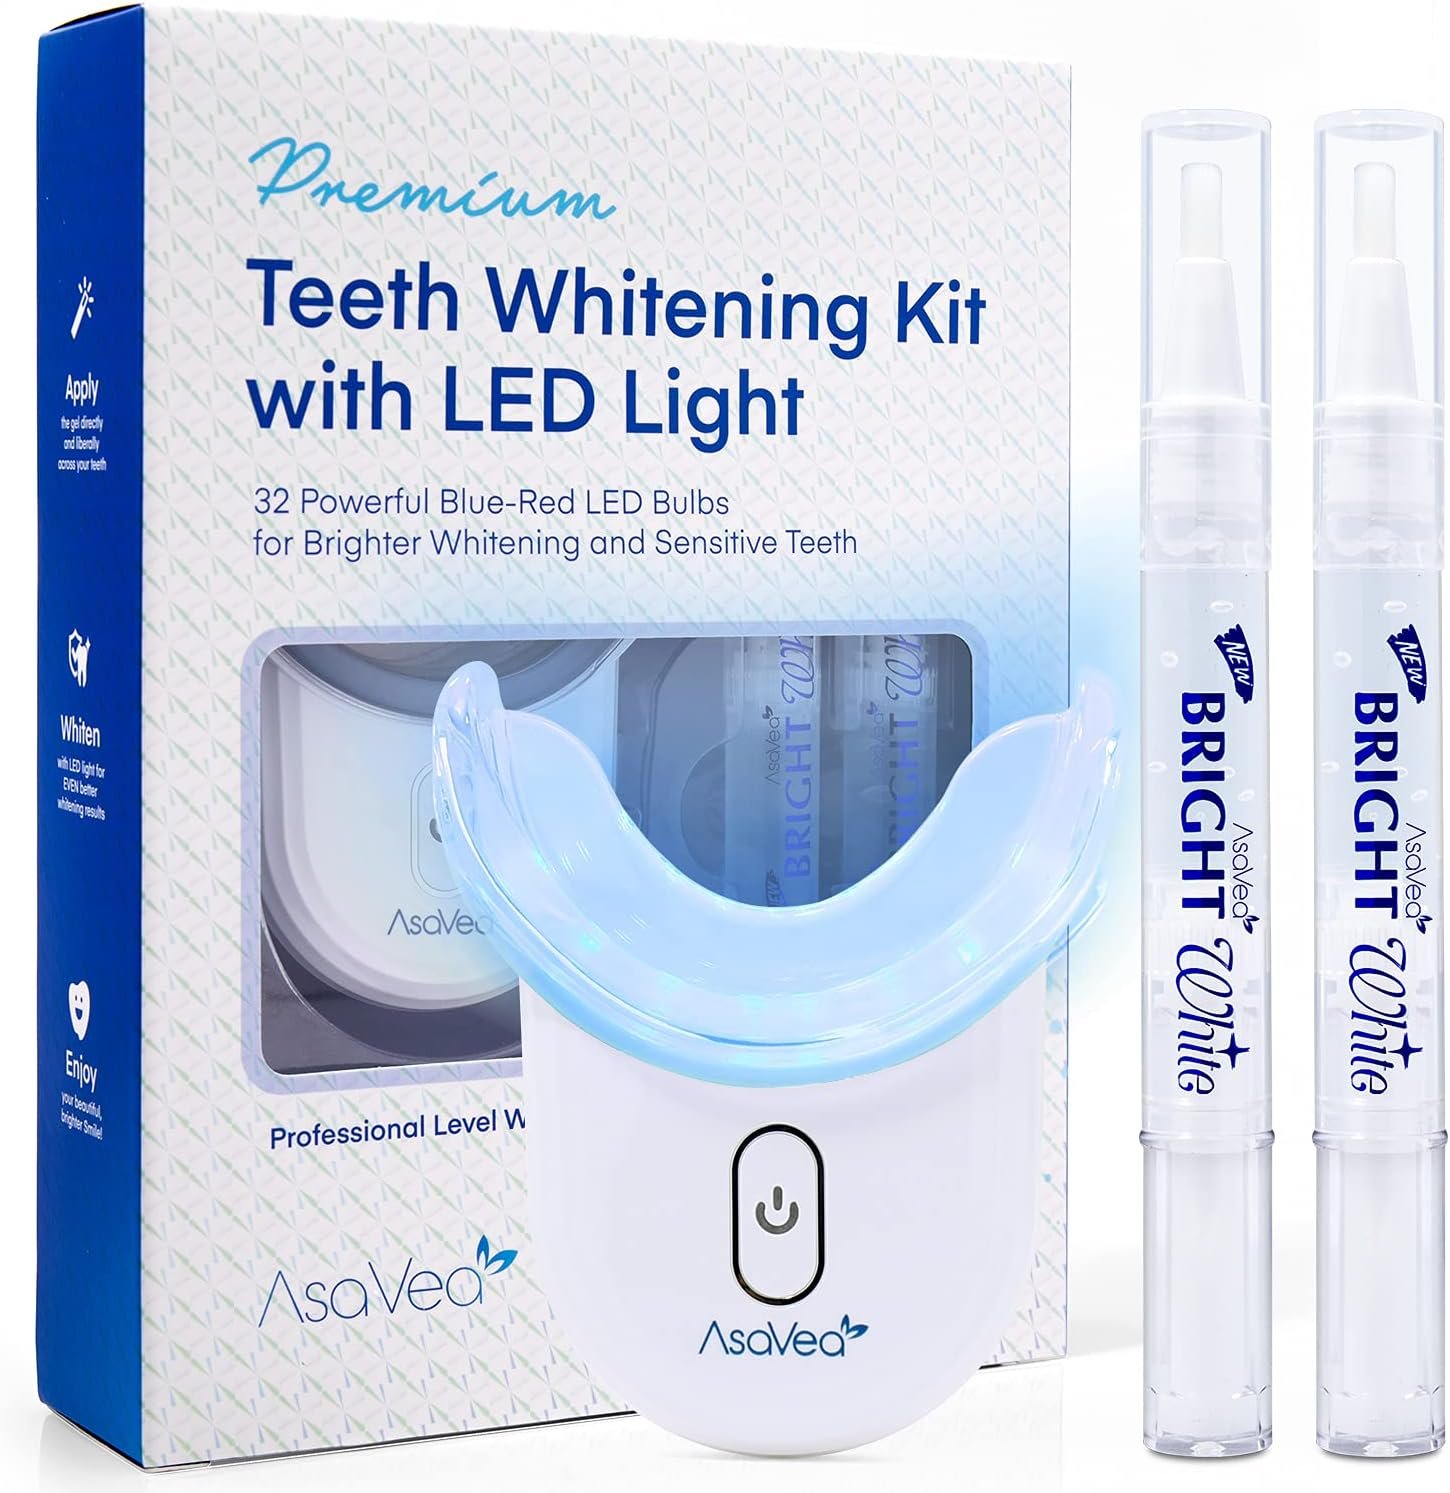 AsaVea Smile Teeth Whitening Kit with LED Light - Teeth Whitening Pen with 32X Powerful Blue-Red Rechargeable LED Light, Effective for Sensitive Teeth, Comfortable and Accelerated Teeth Whitening